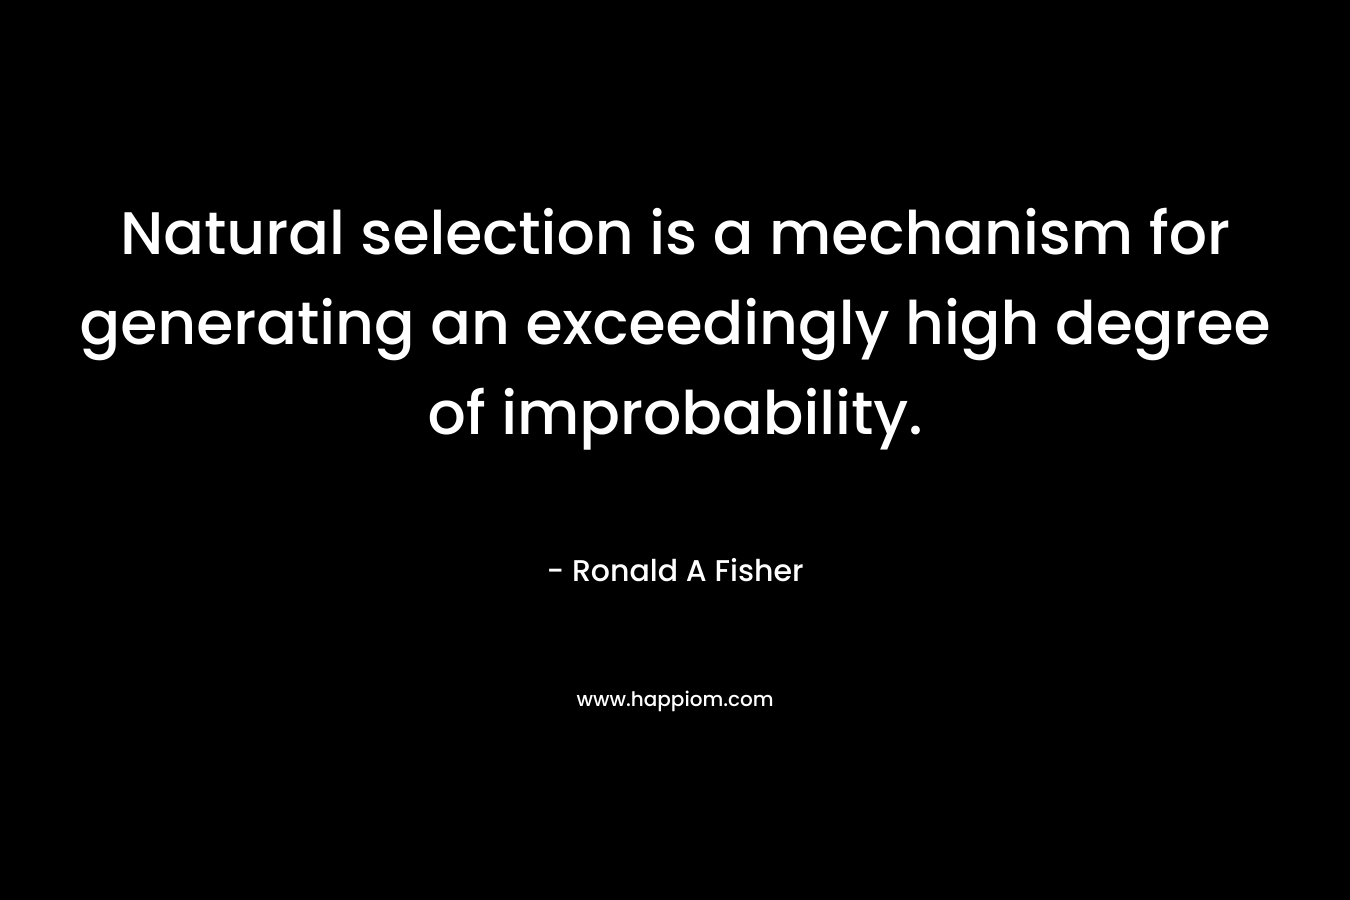 Natural selection is a mechanism for generating an exceedingly high degree of improbability. – Ronald A Fisher